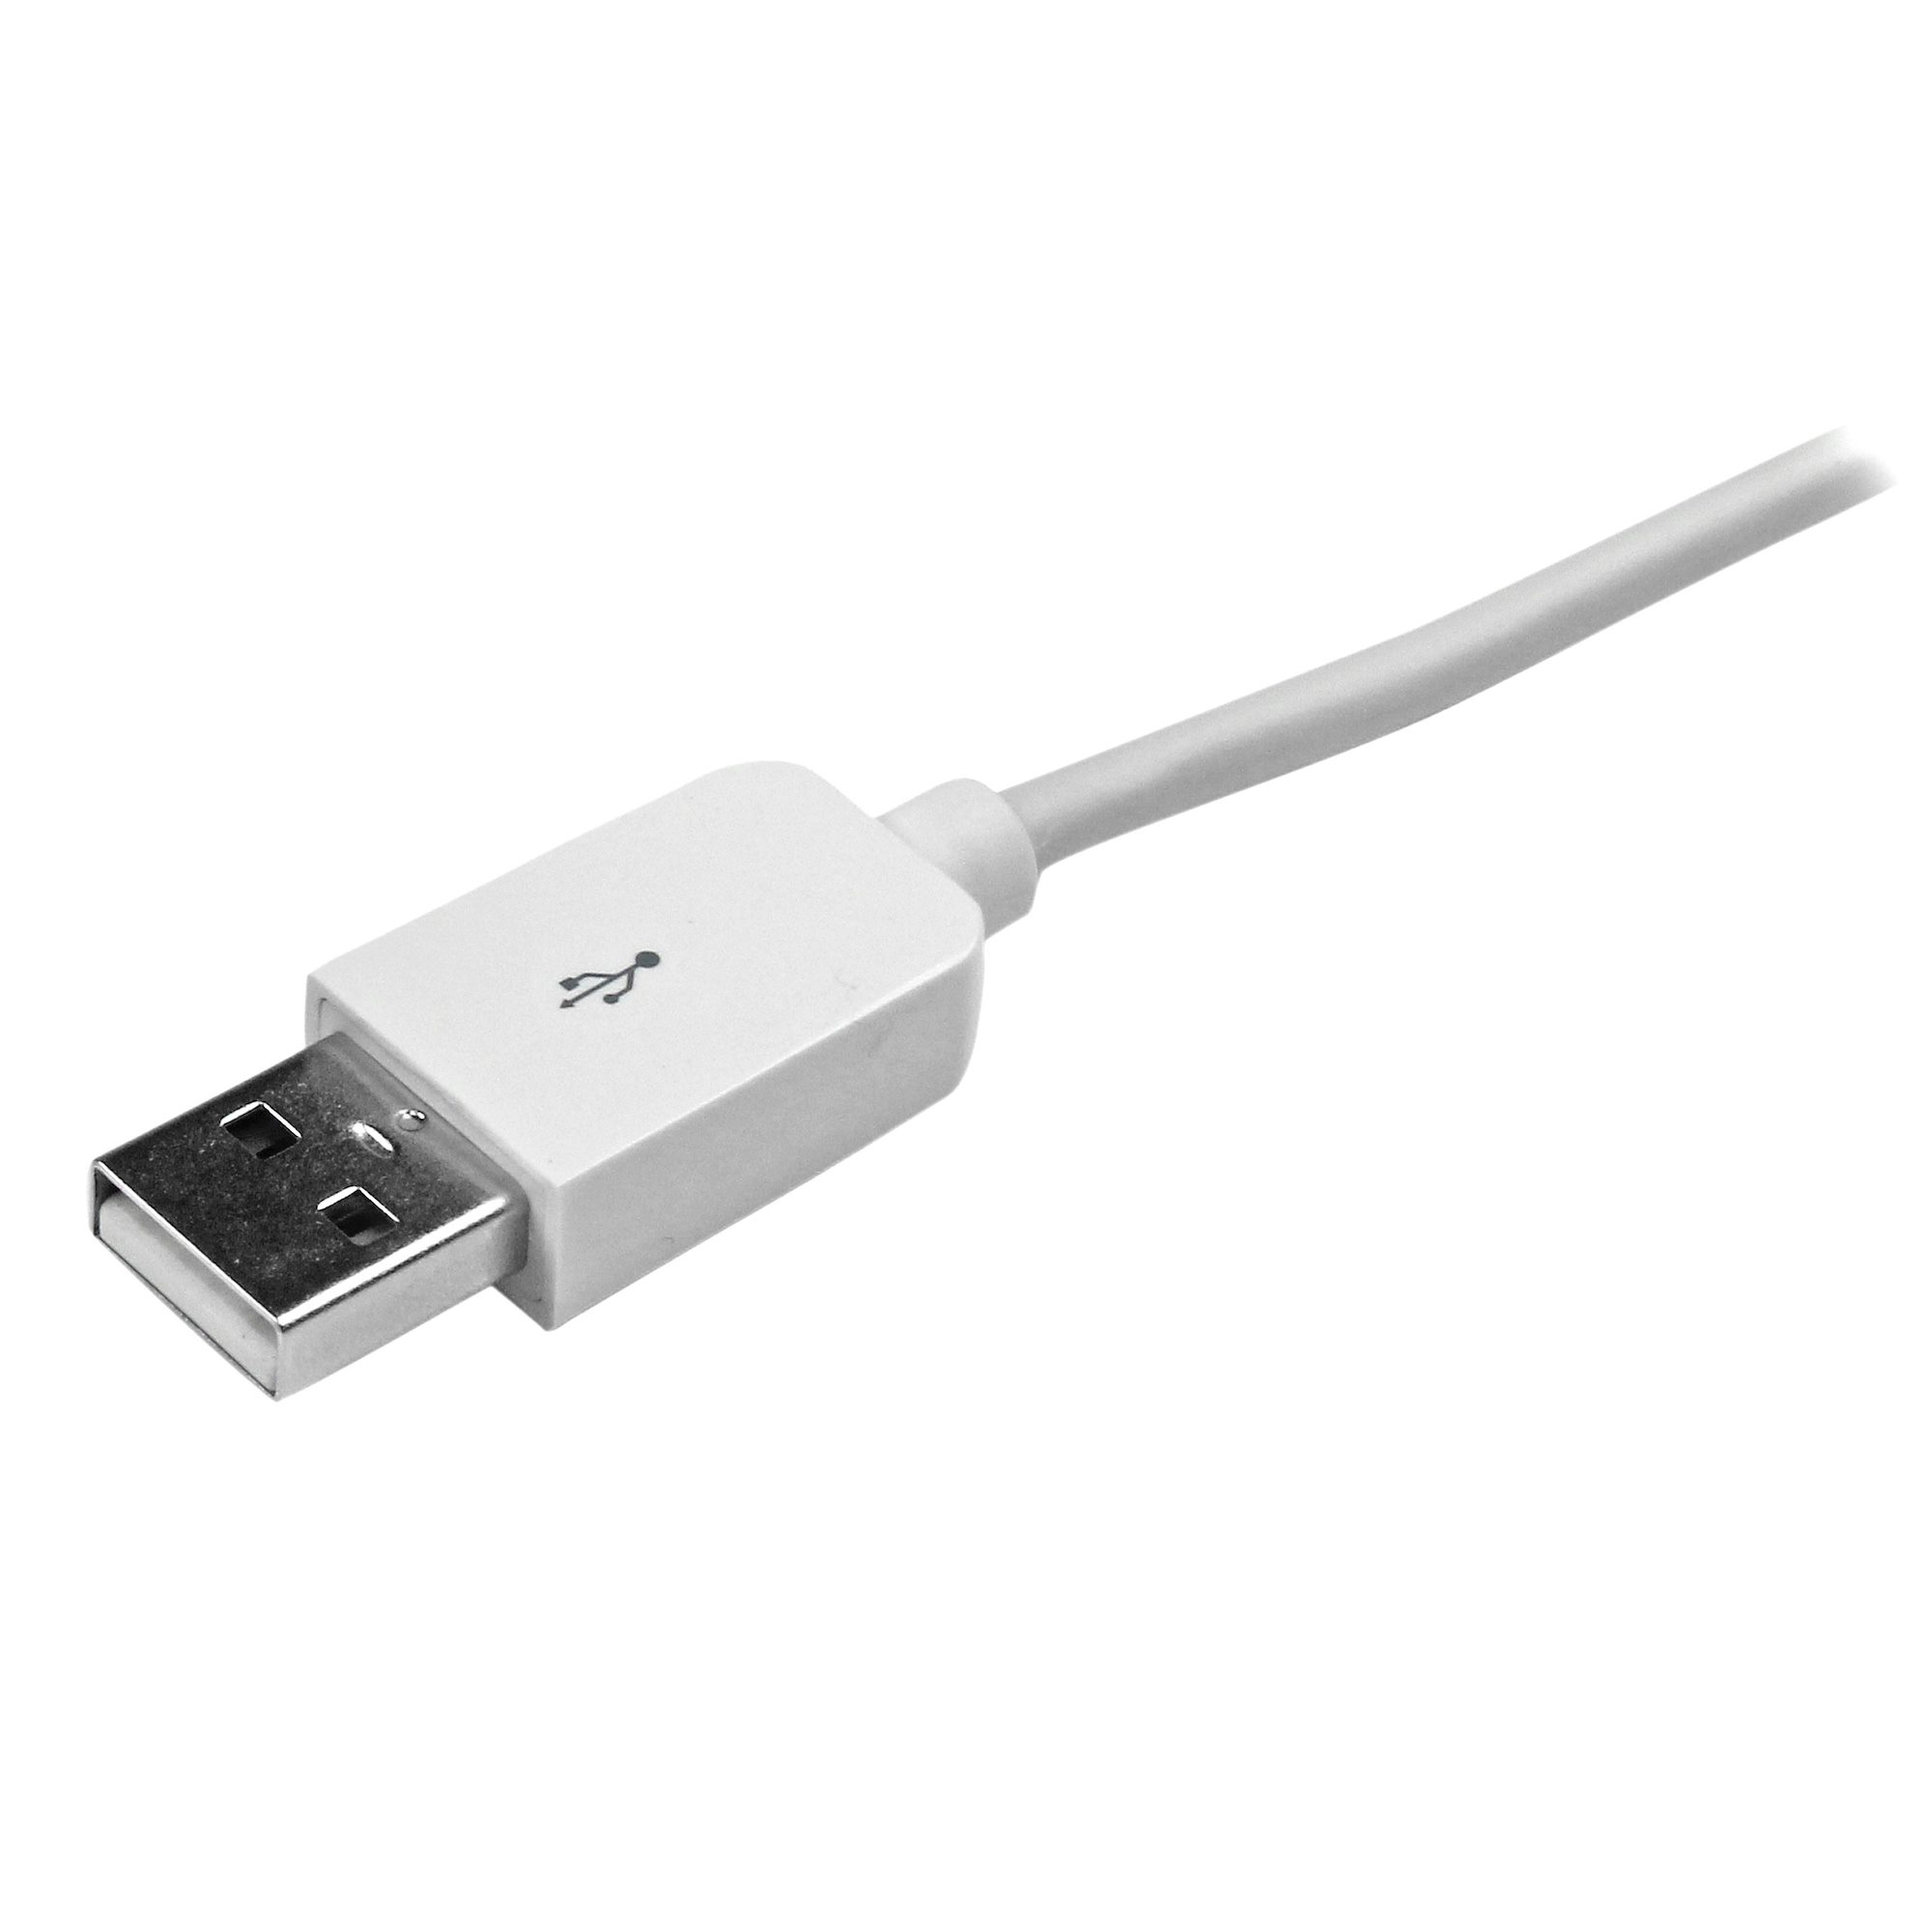 Cable Dock Type 2 / White Cbldock-T2-W, Support base for Wallbox charging  cable. CBLDOCK-T2-W — Acpclima